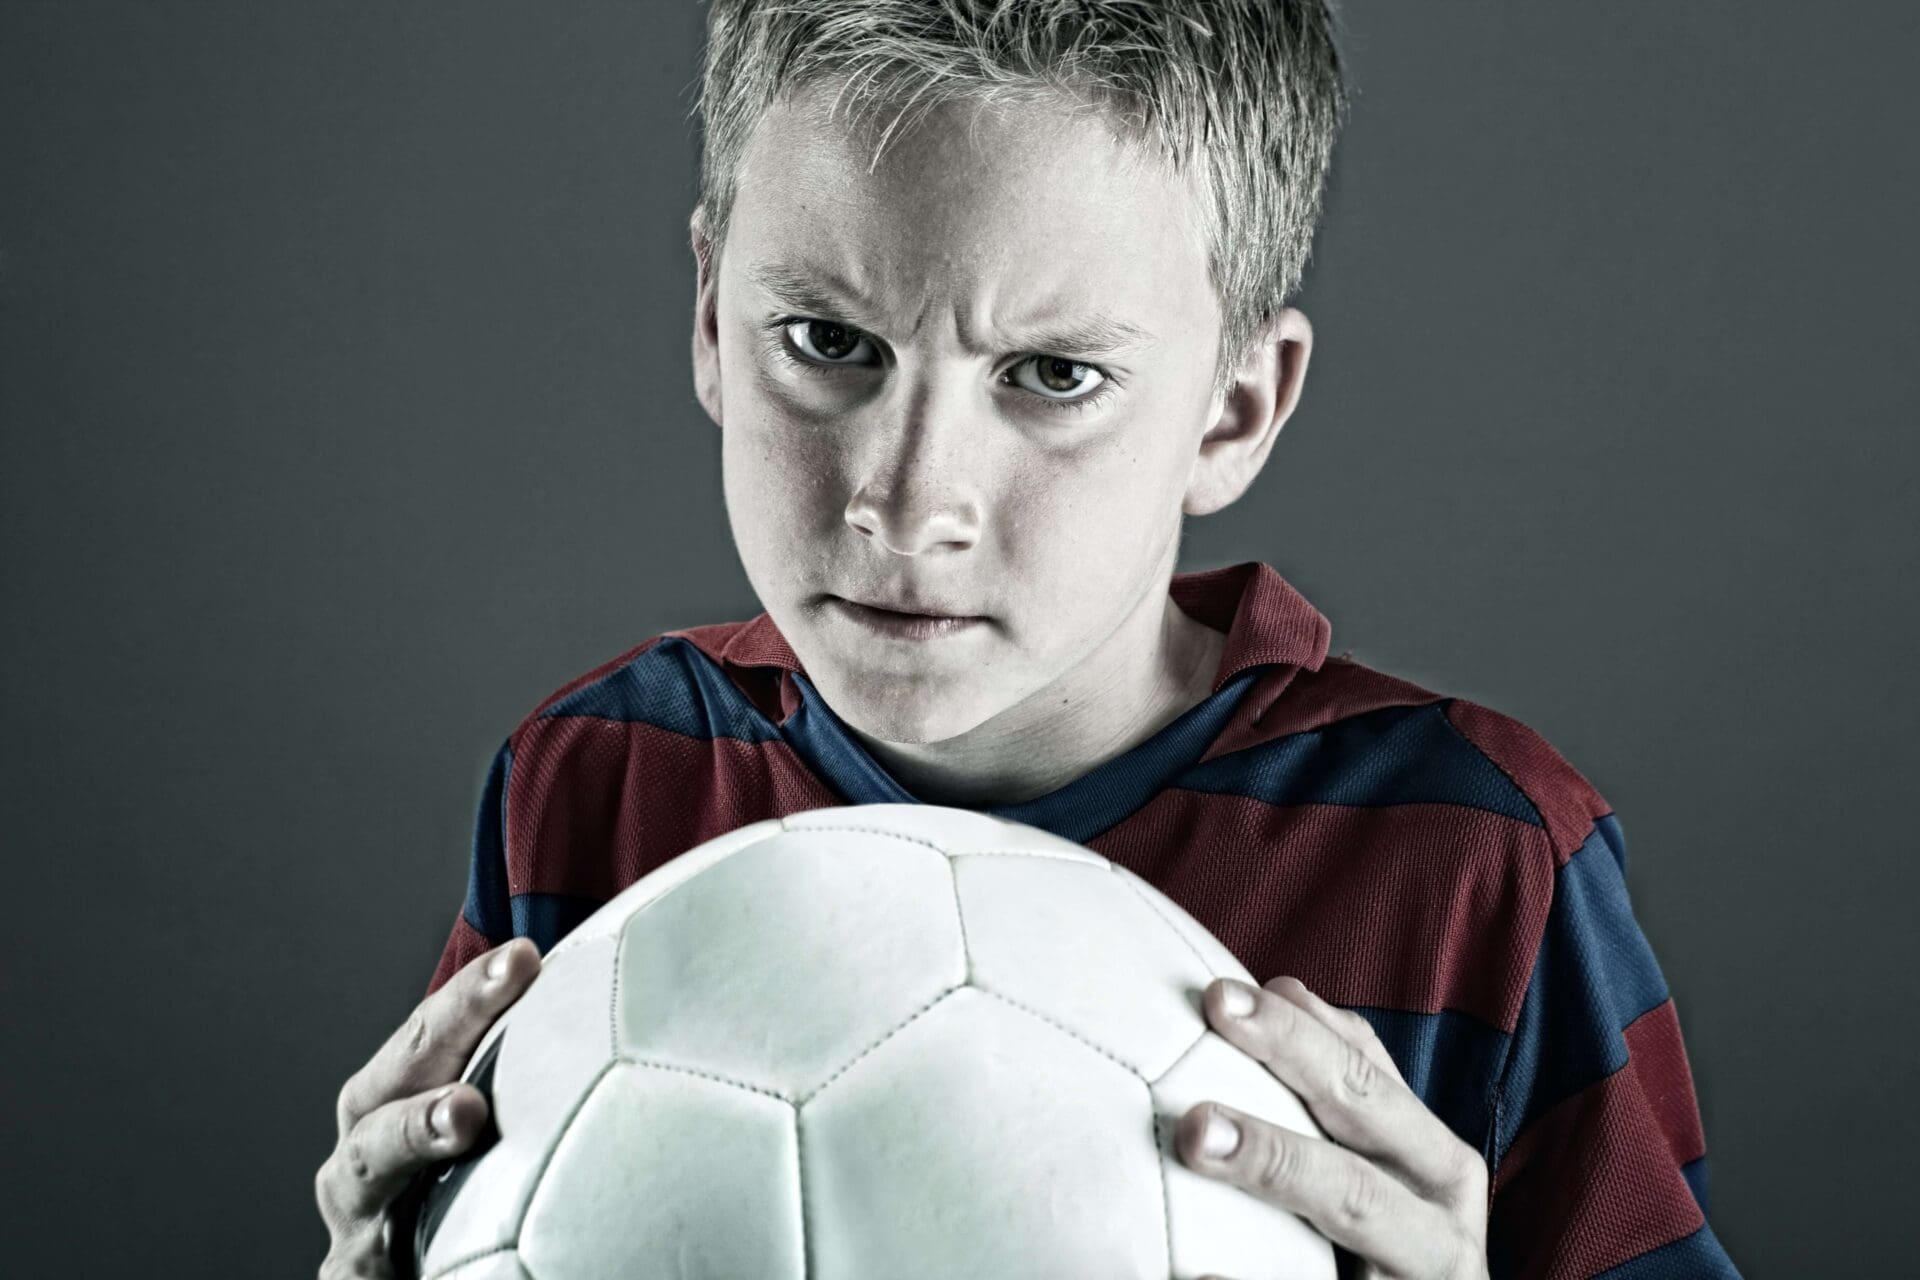 How to Support an Angry Young Athlete